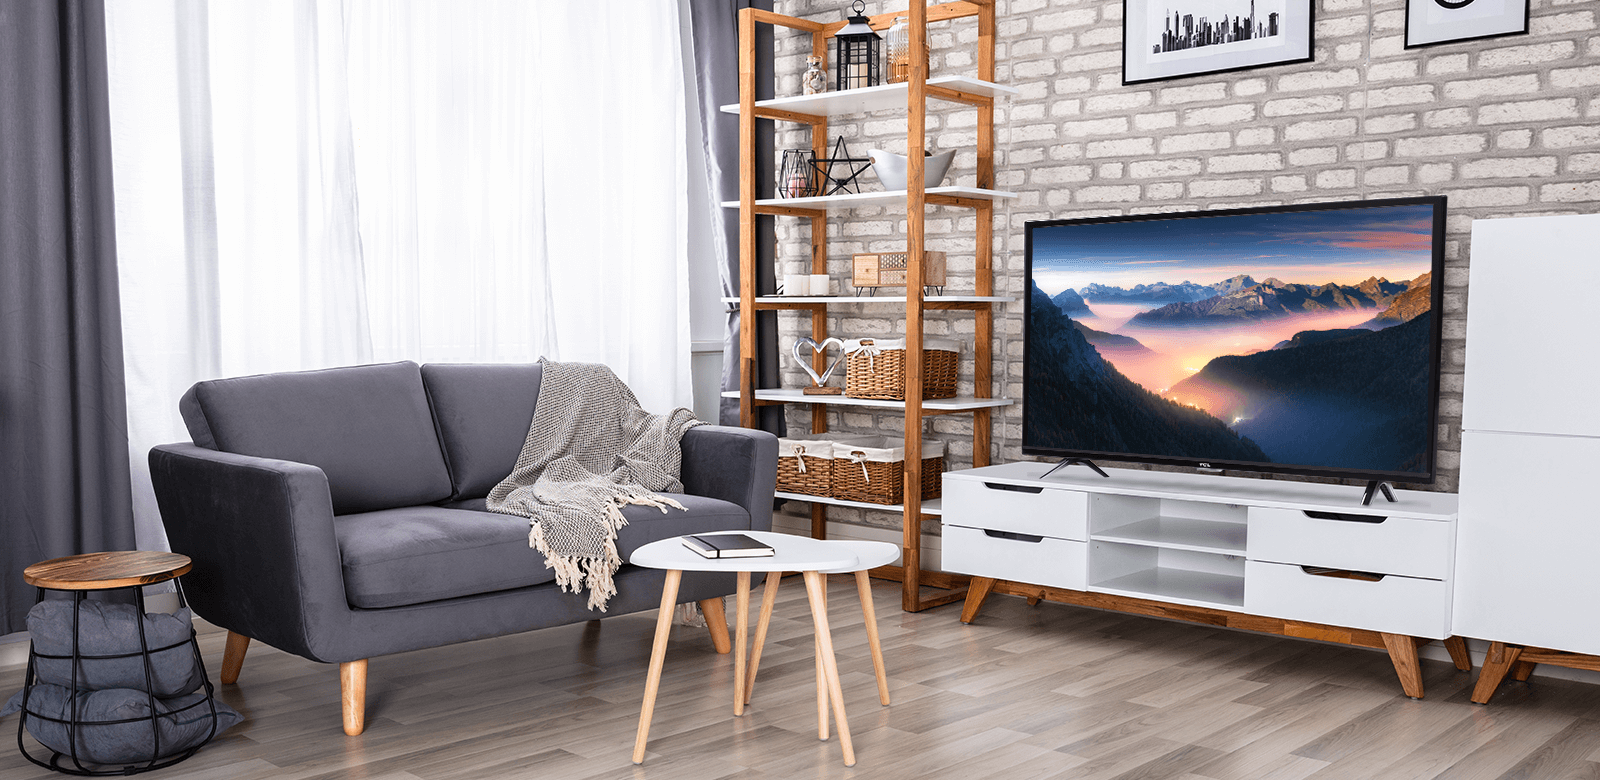 TCL 3-Series lifestyle